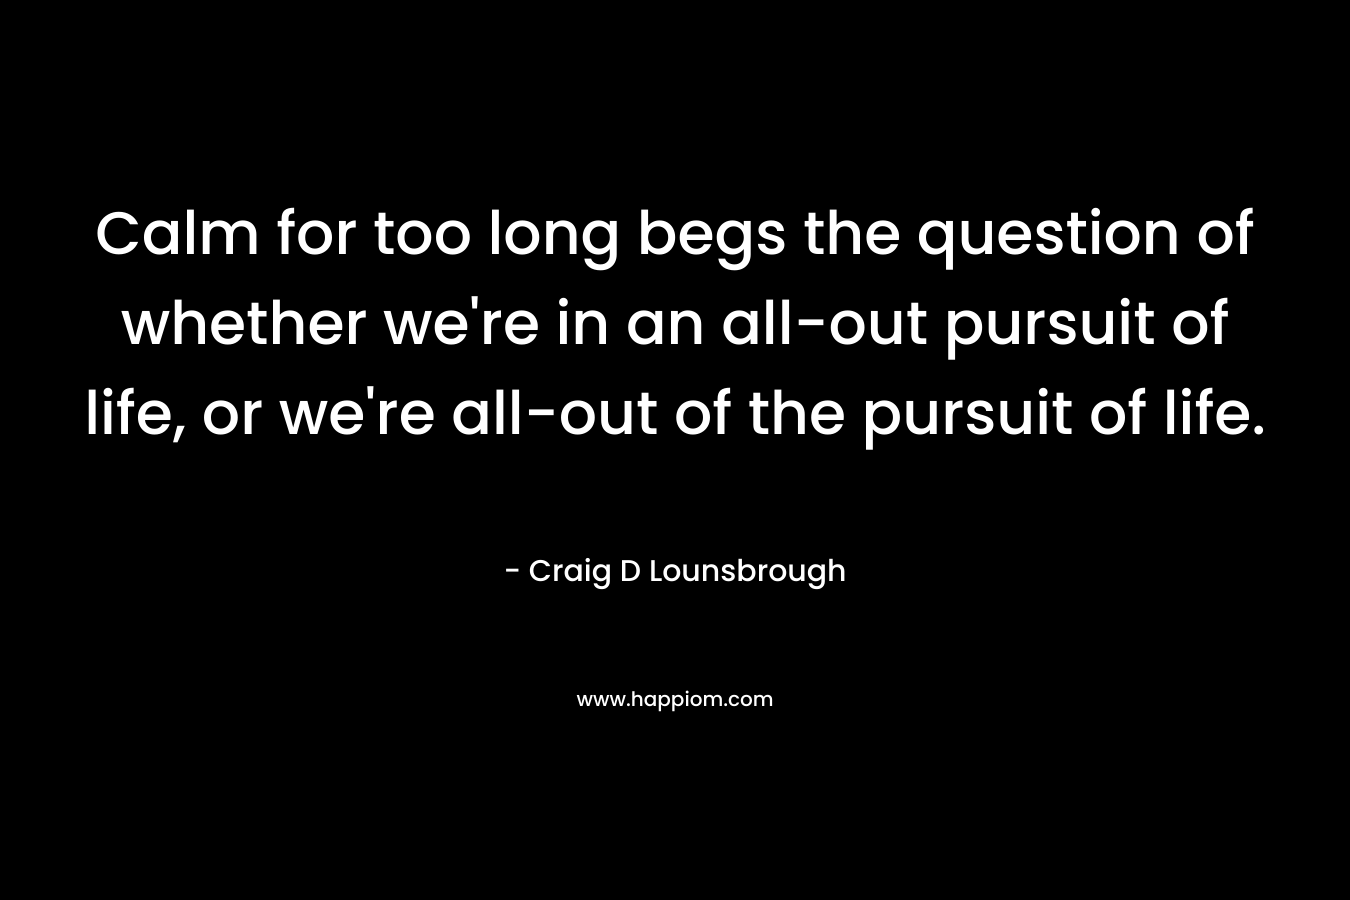 Calm for too long begs the question of whether we’re in an all-out pursuit of life, or we’re all-out of the pursuit of life. – Craig D Lounsbrough